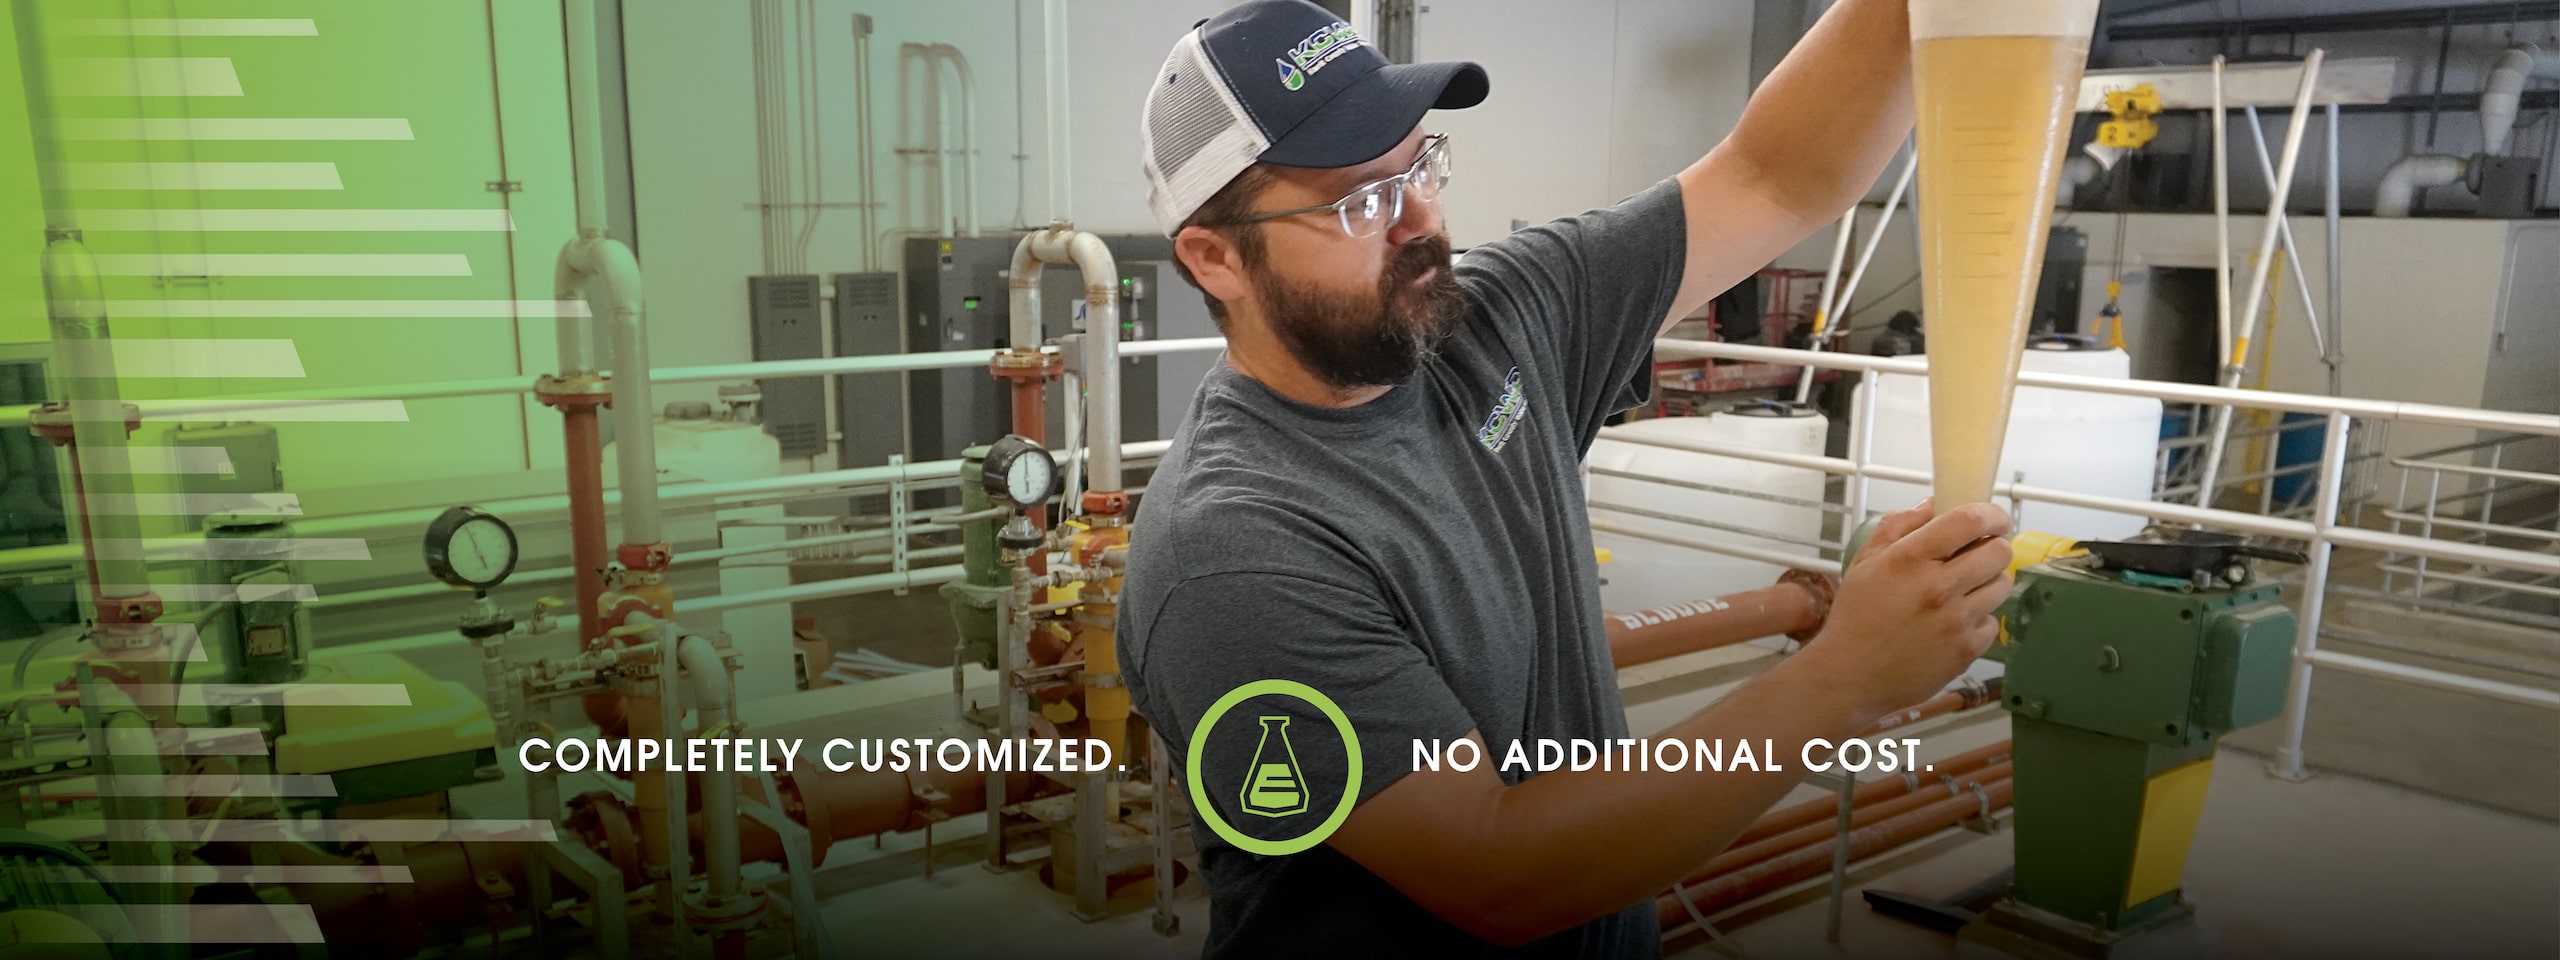 Our CLEAN Chemical Program provides a unique plan that is customized to our client’s specific needs at no additional cost.